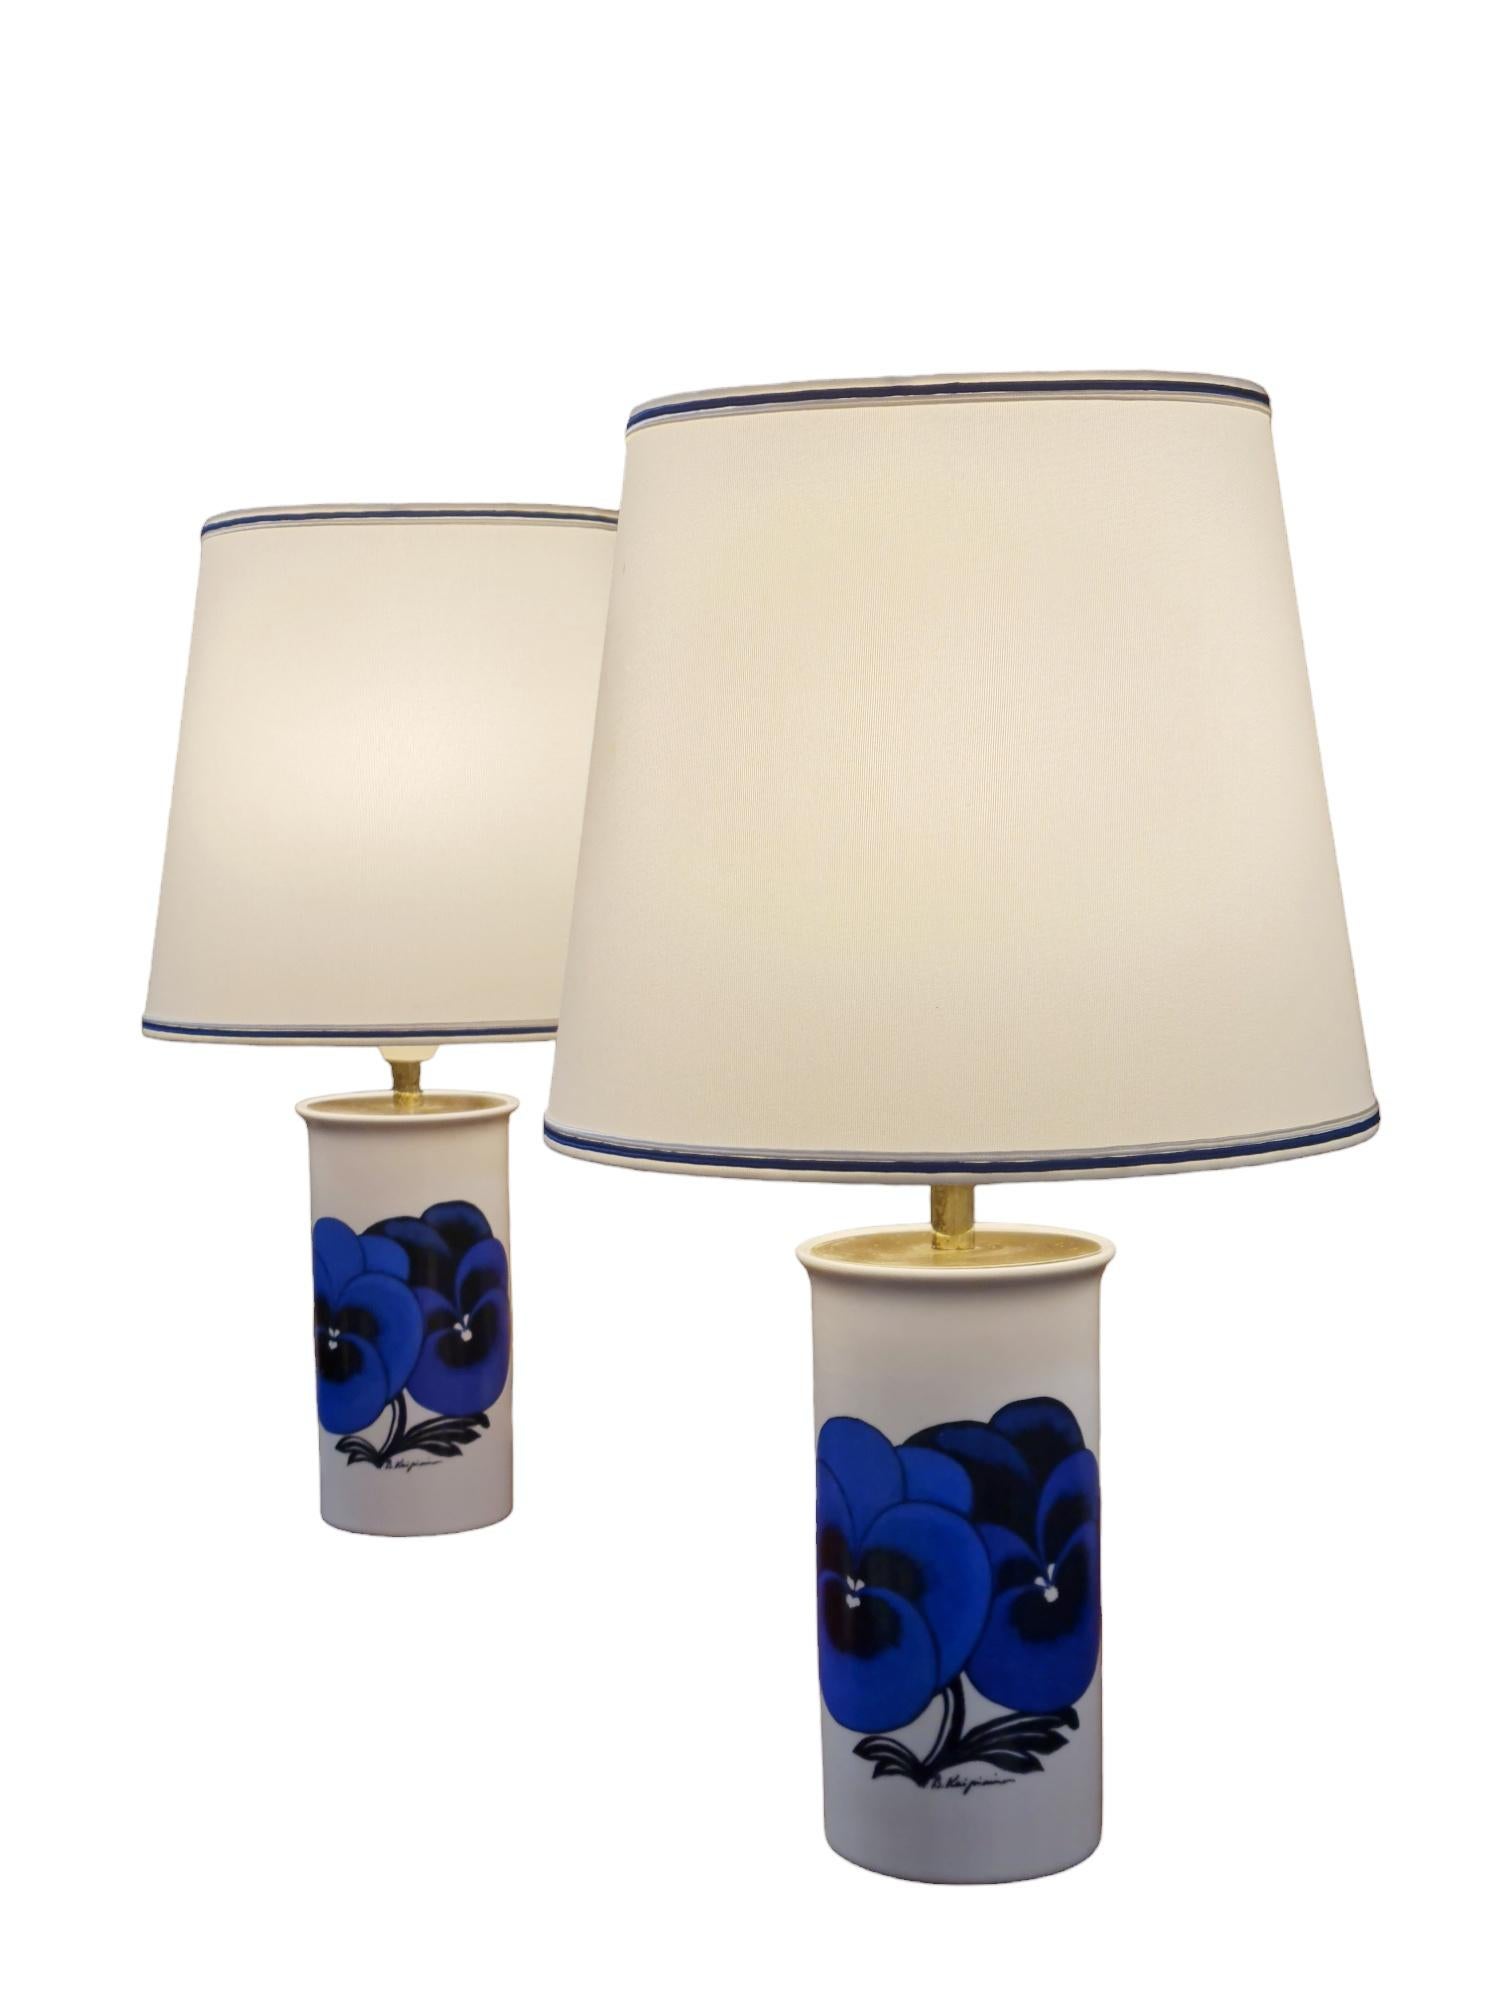 A Pair of Birger Kaipiainen Table Lamps, Arabia 1980s For Sale 2